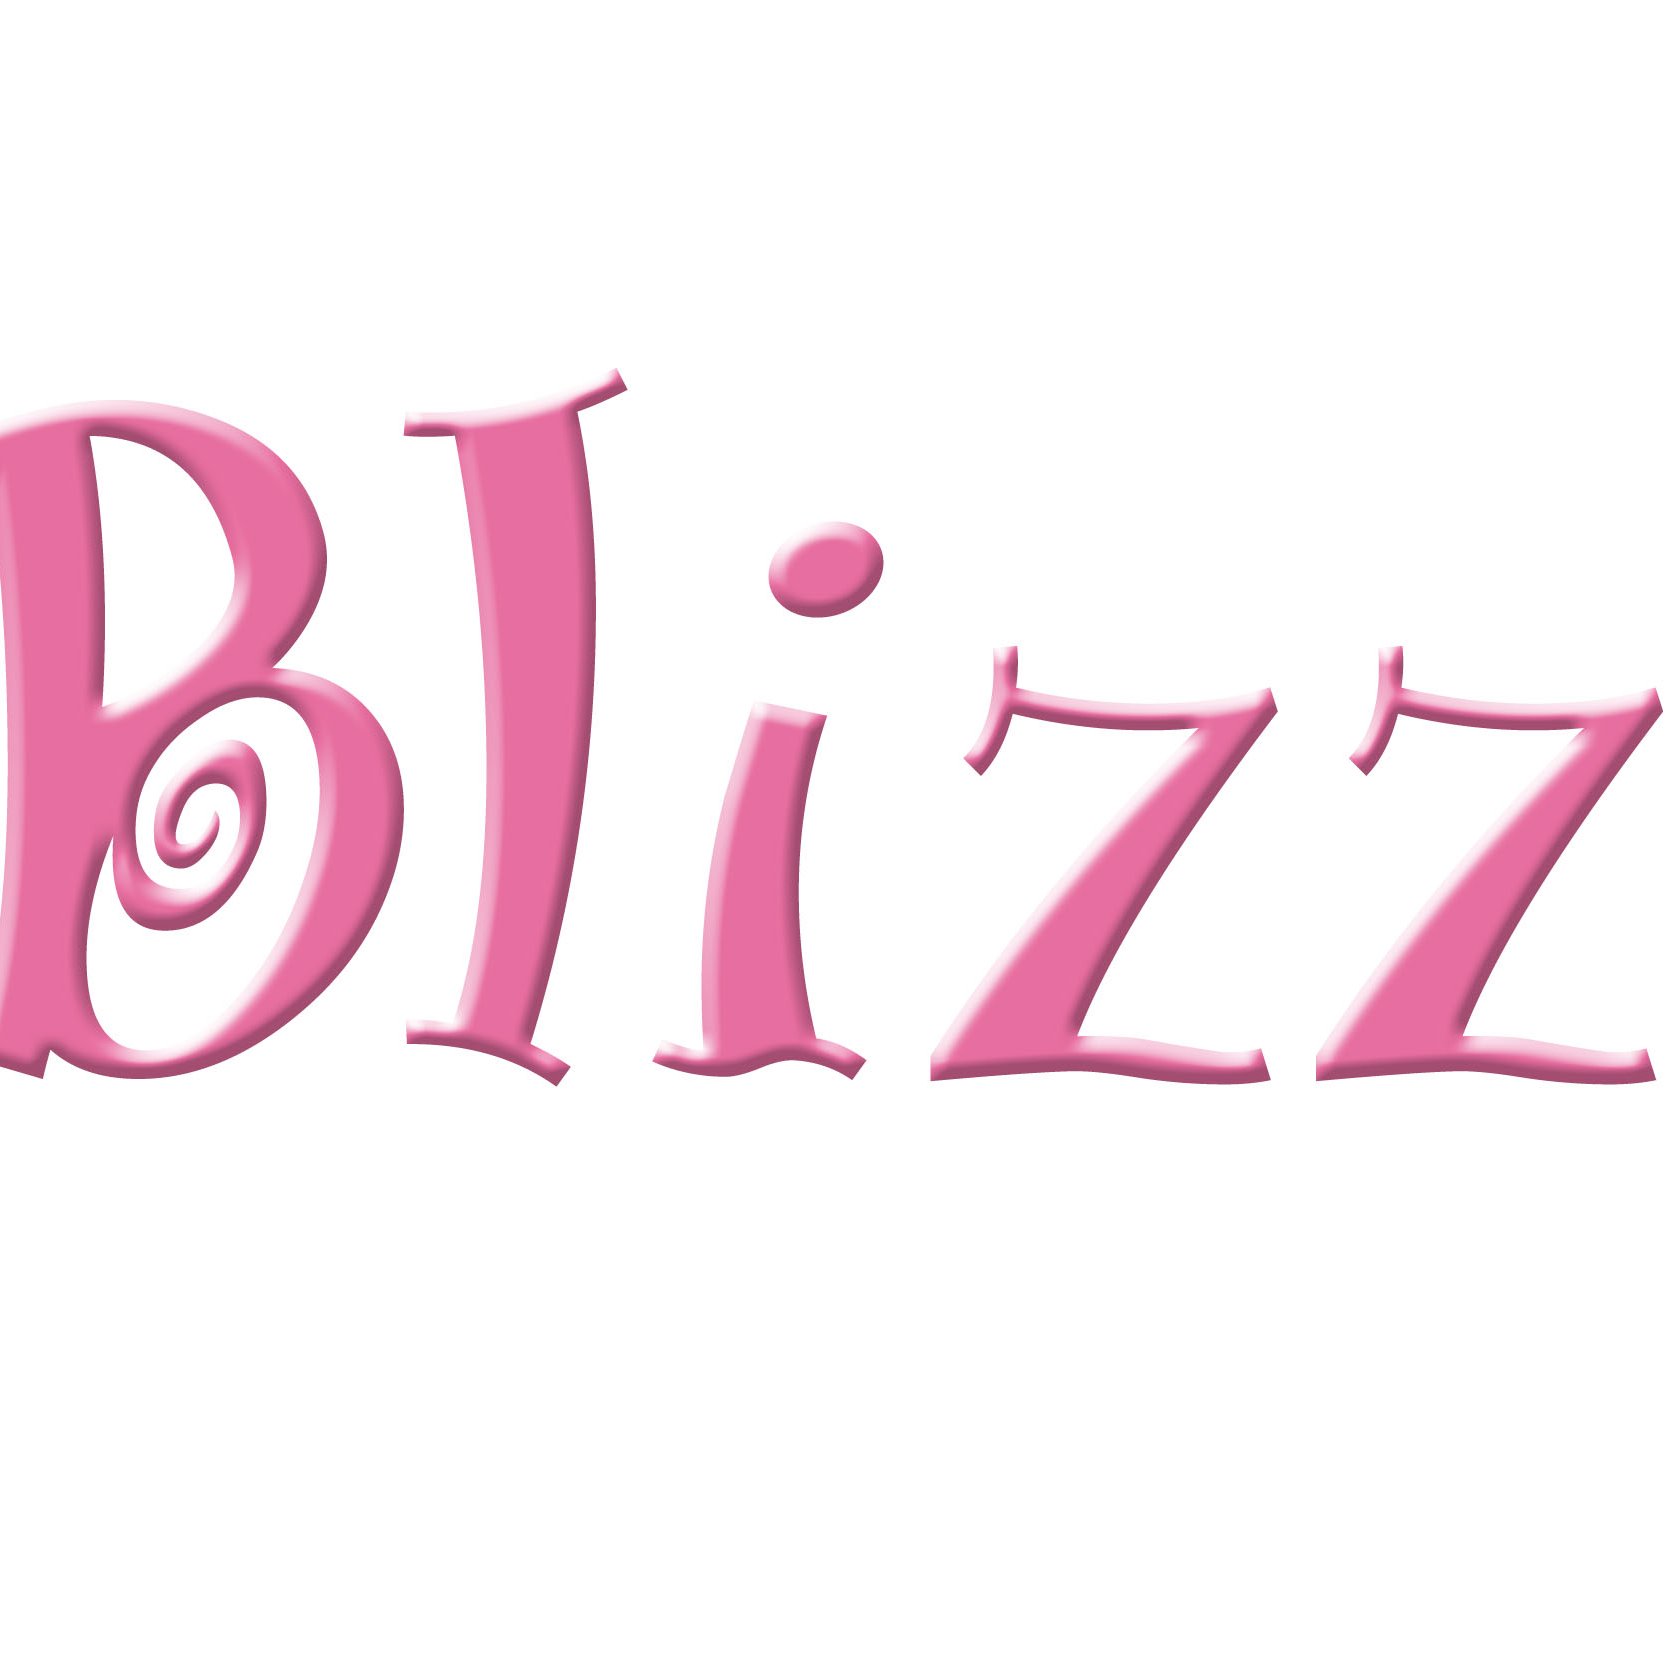 Blizz Frozen Yogurt!  Serving the BEST frozen yogurt, crepes, smoothies, power bowls and juice right off VanNuys & Burbank Blvd. Come check us out!